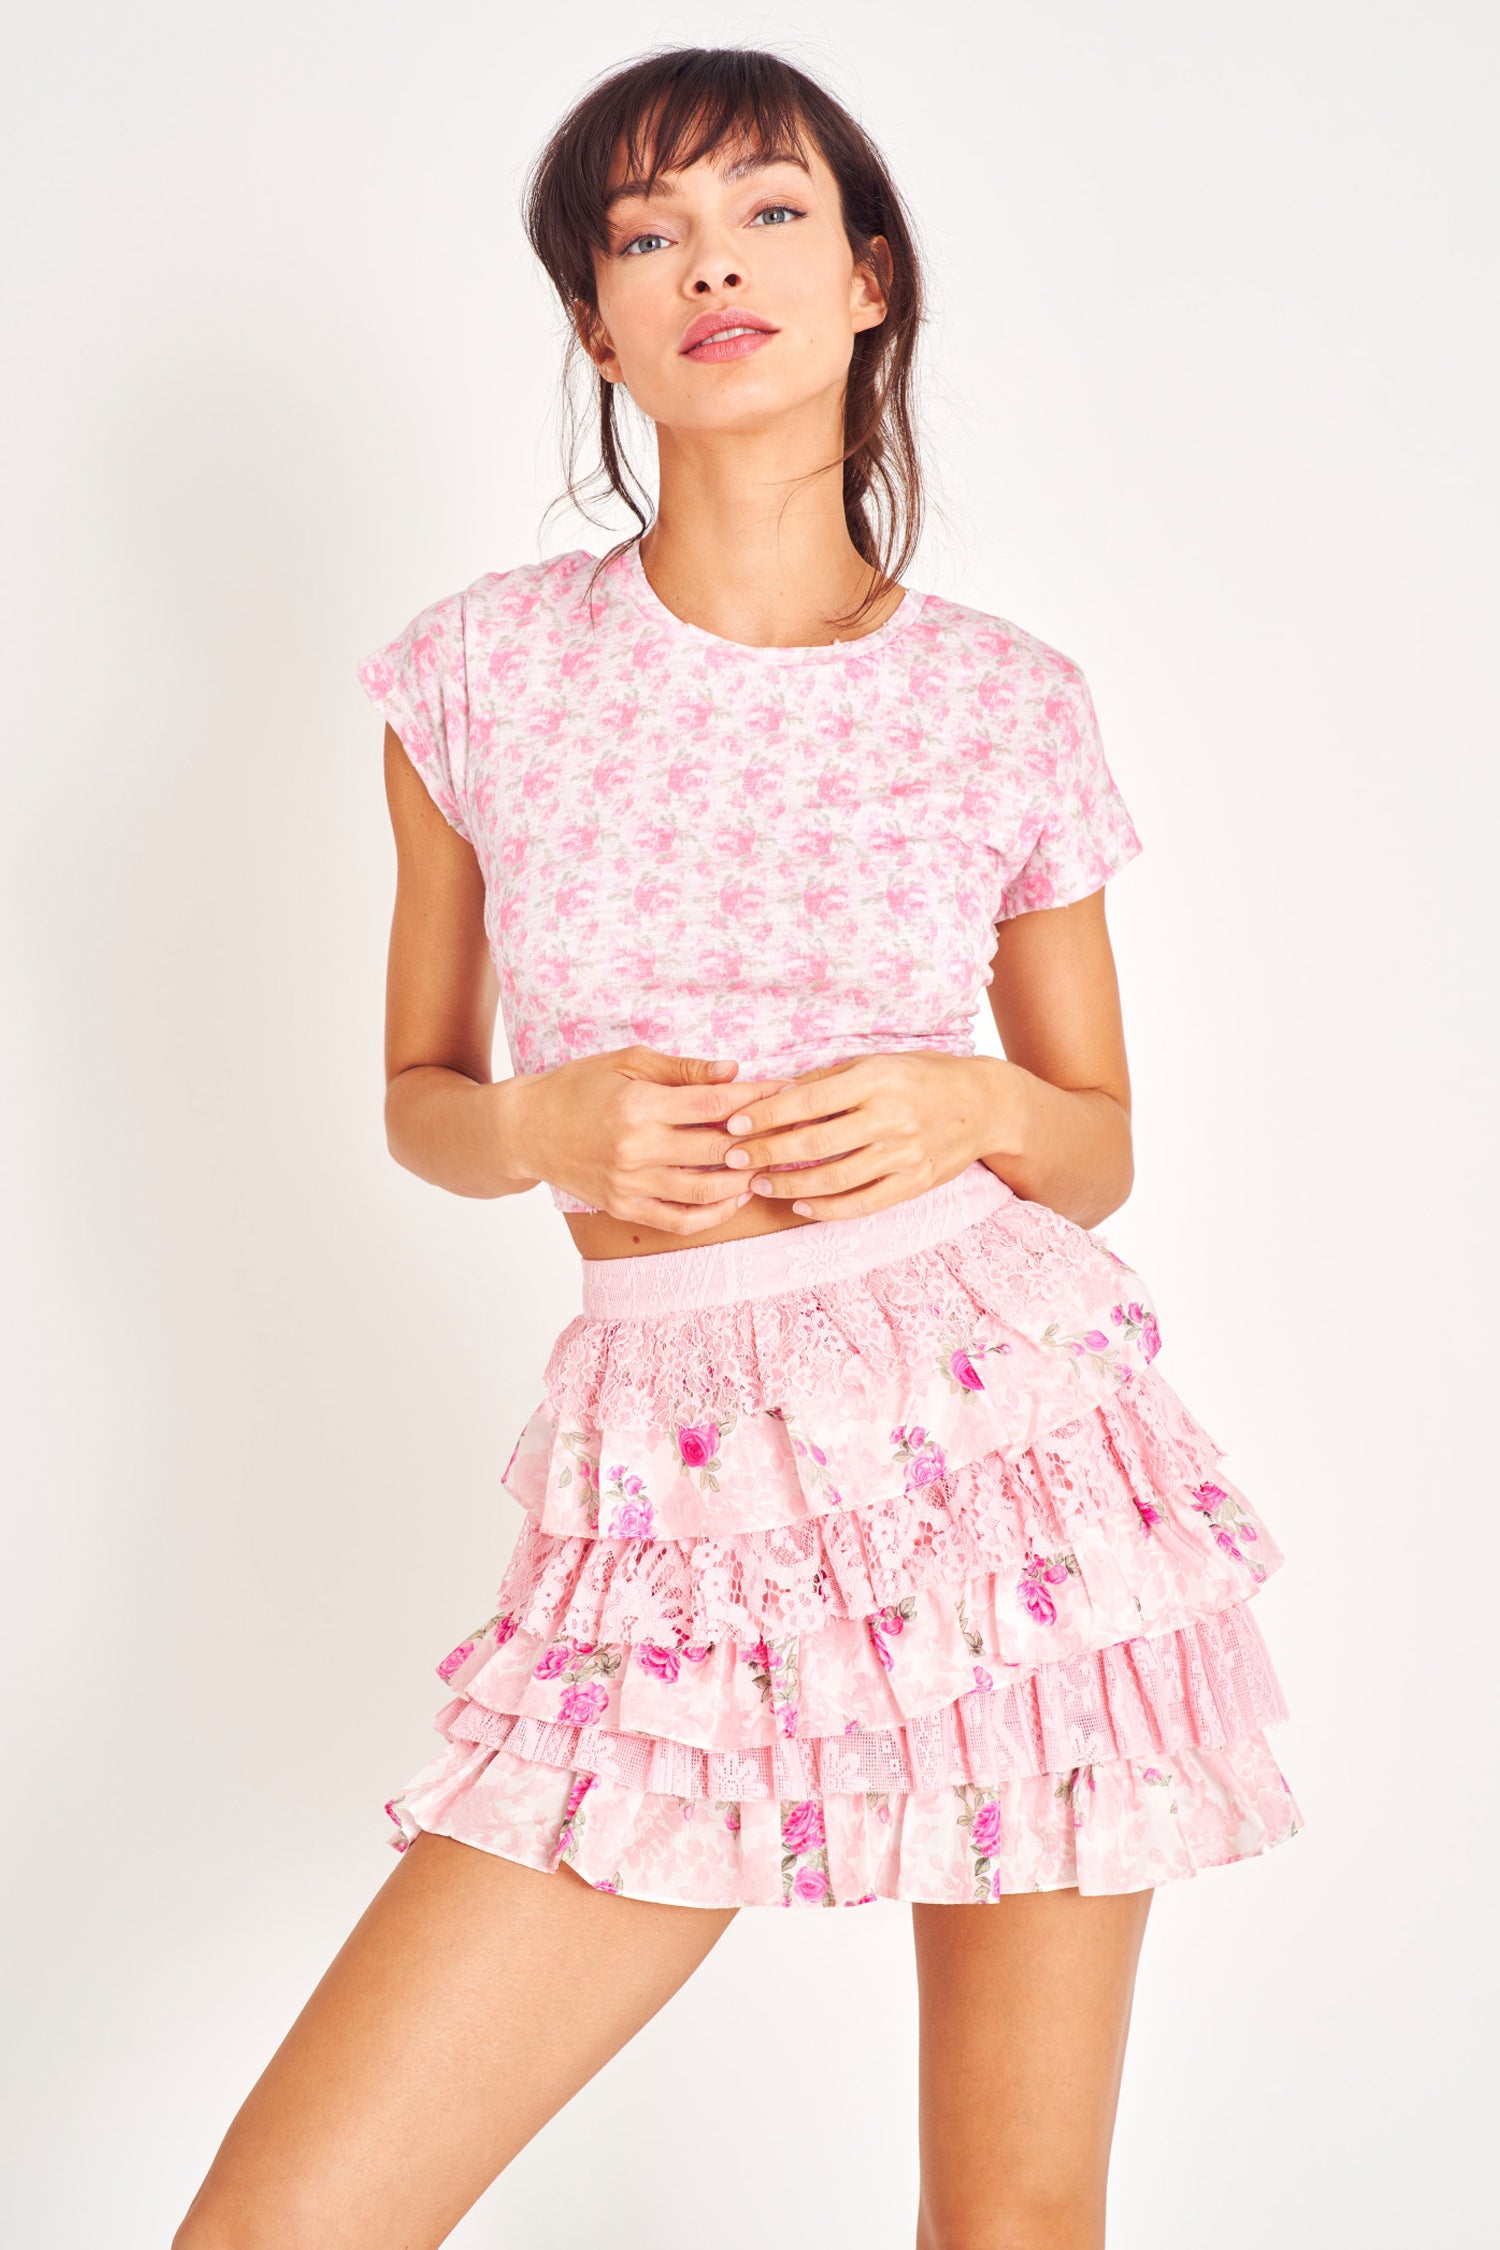 Ruffle pink mini skirt with lace and floral prints, and elastic waistband.